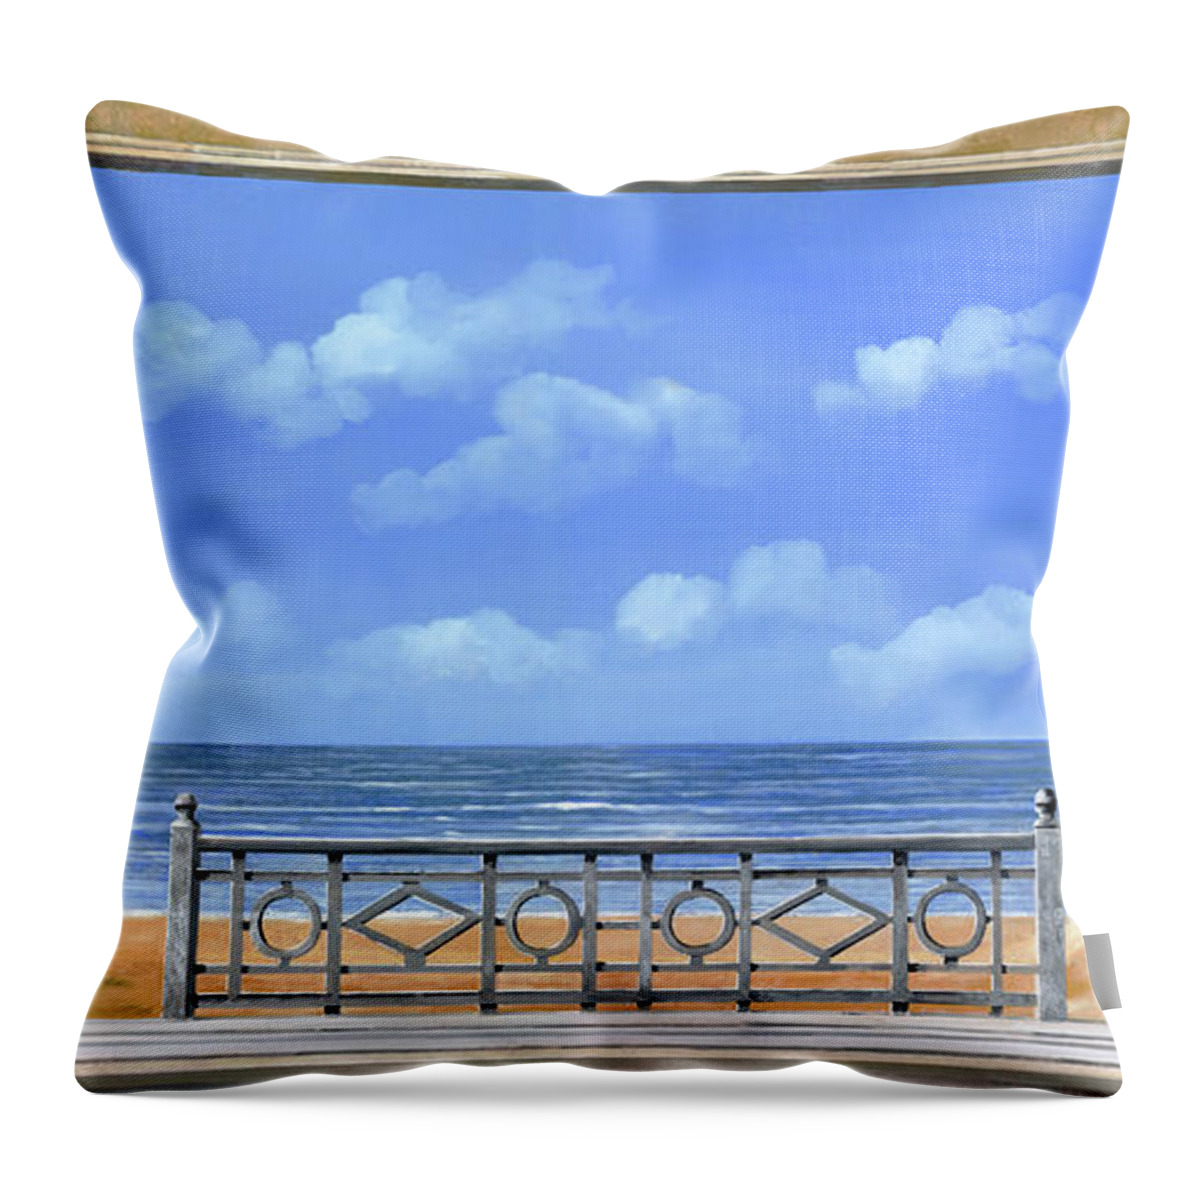 Beach Throw Pillow featuring the painting La Spiaggia Sotto Le Nuvole by Guido Borelli